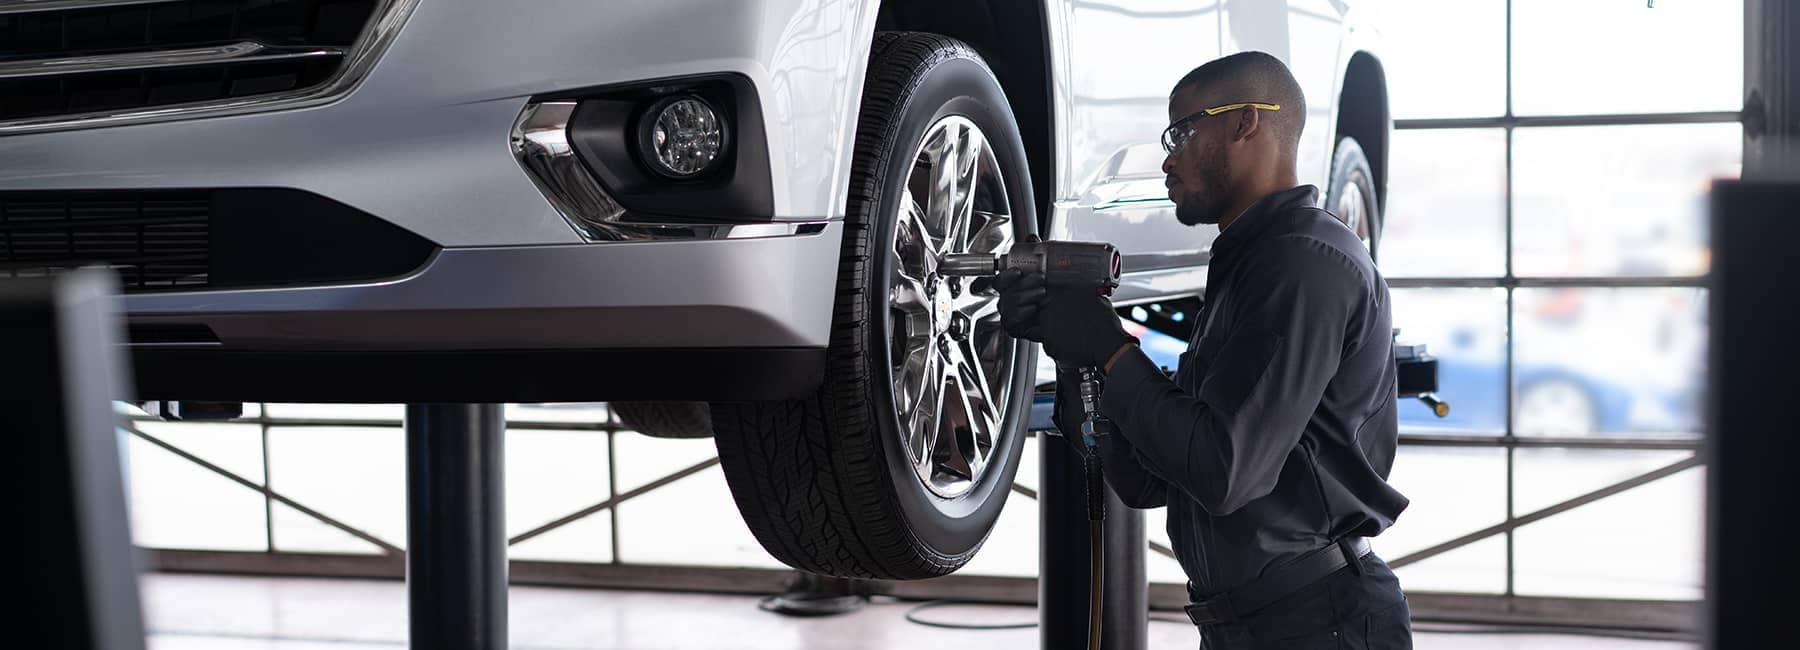 GM service technician working on car tires